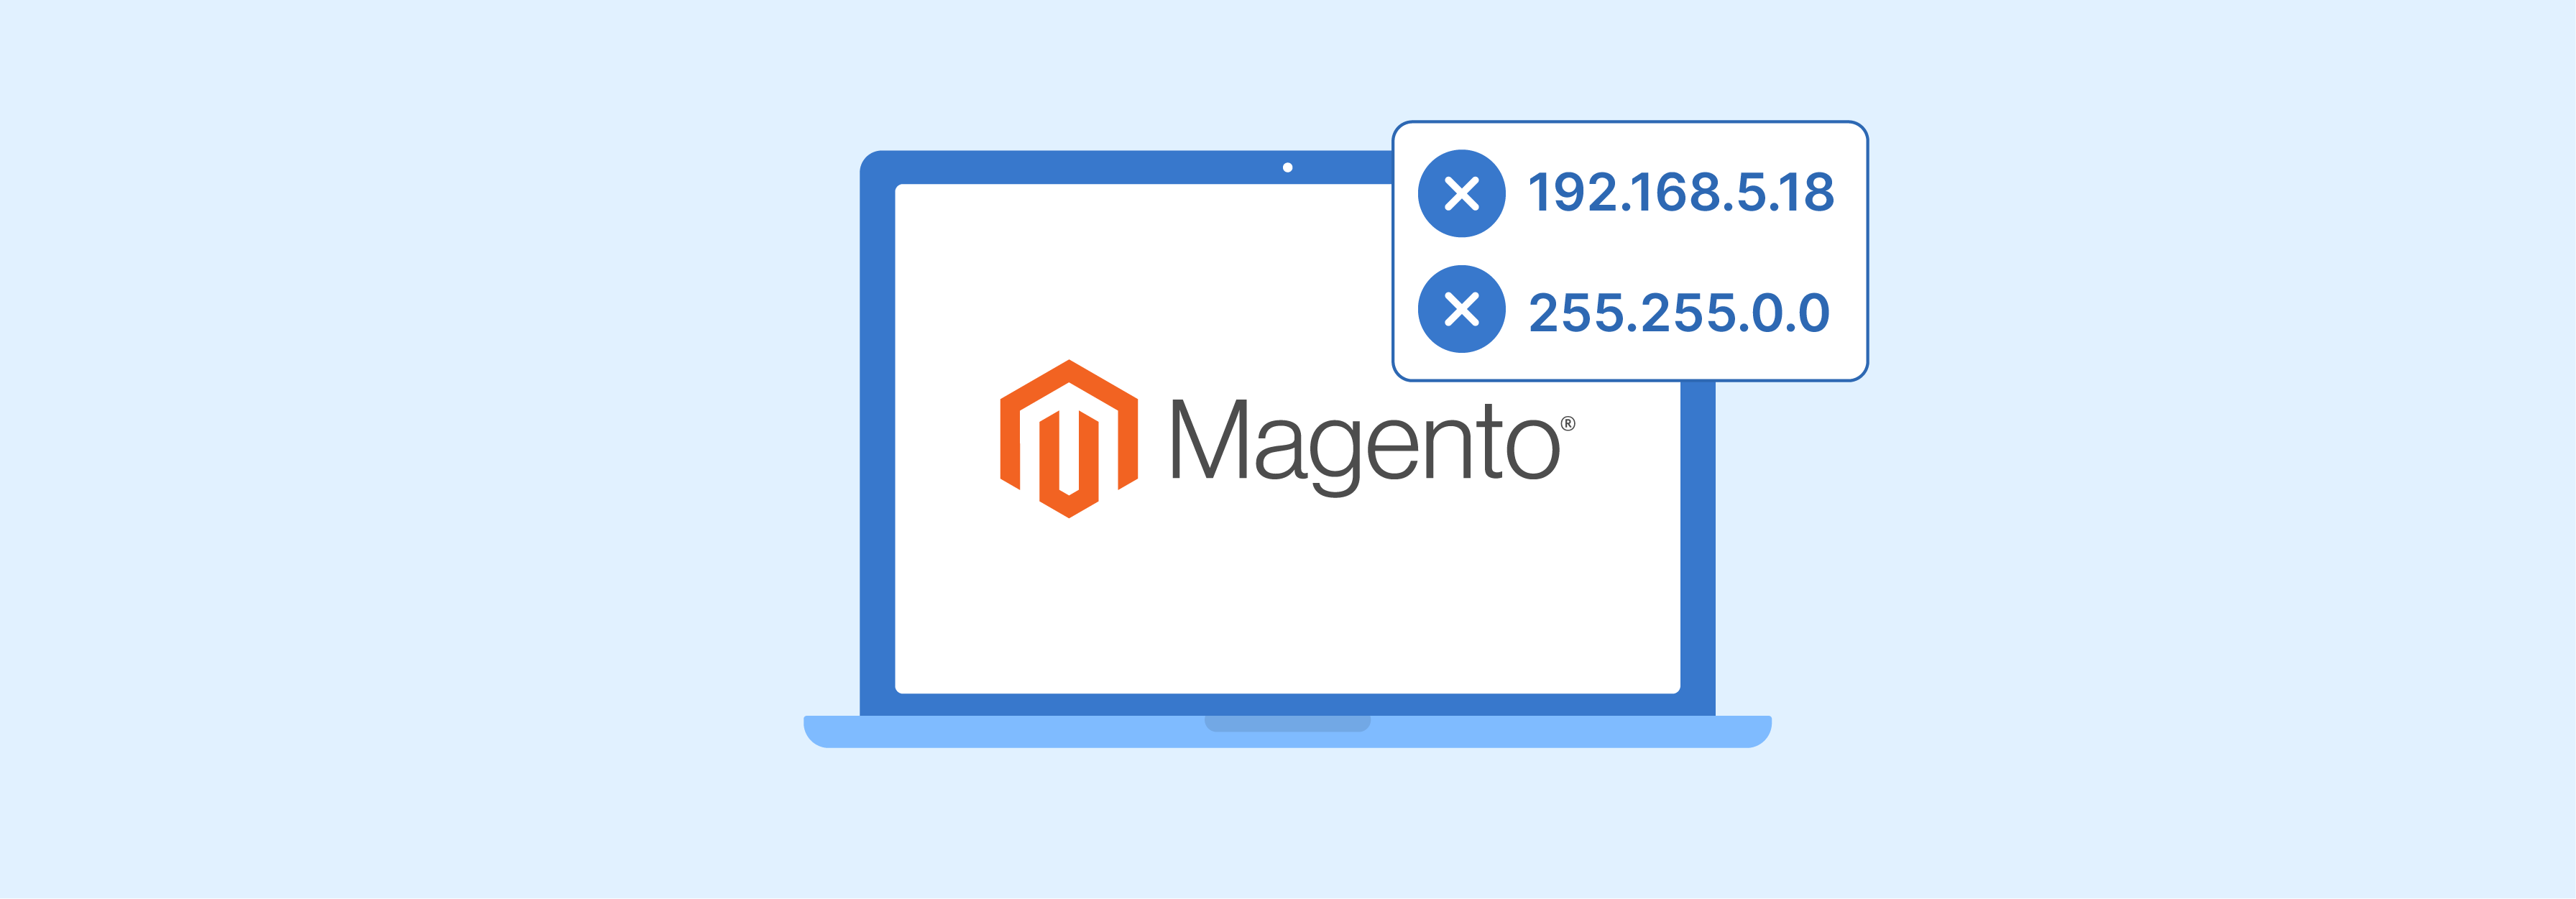 Process of restricting IP address access in Magento admin panel